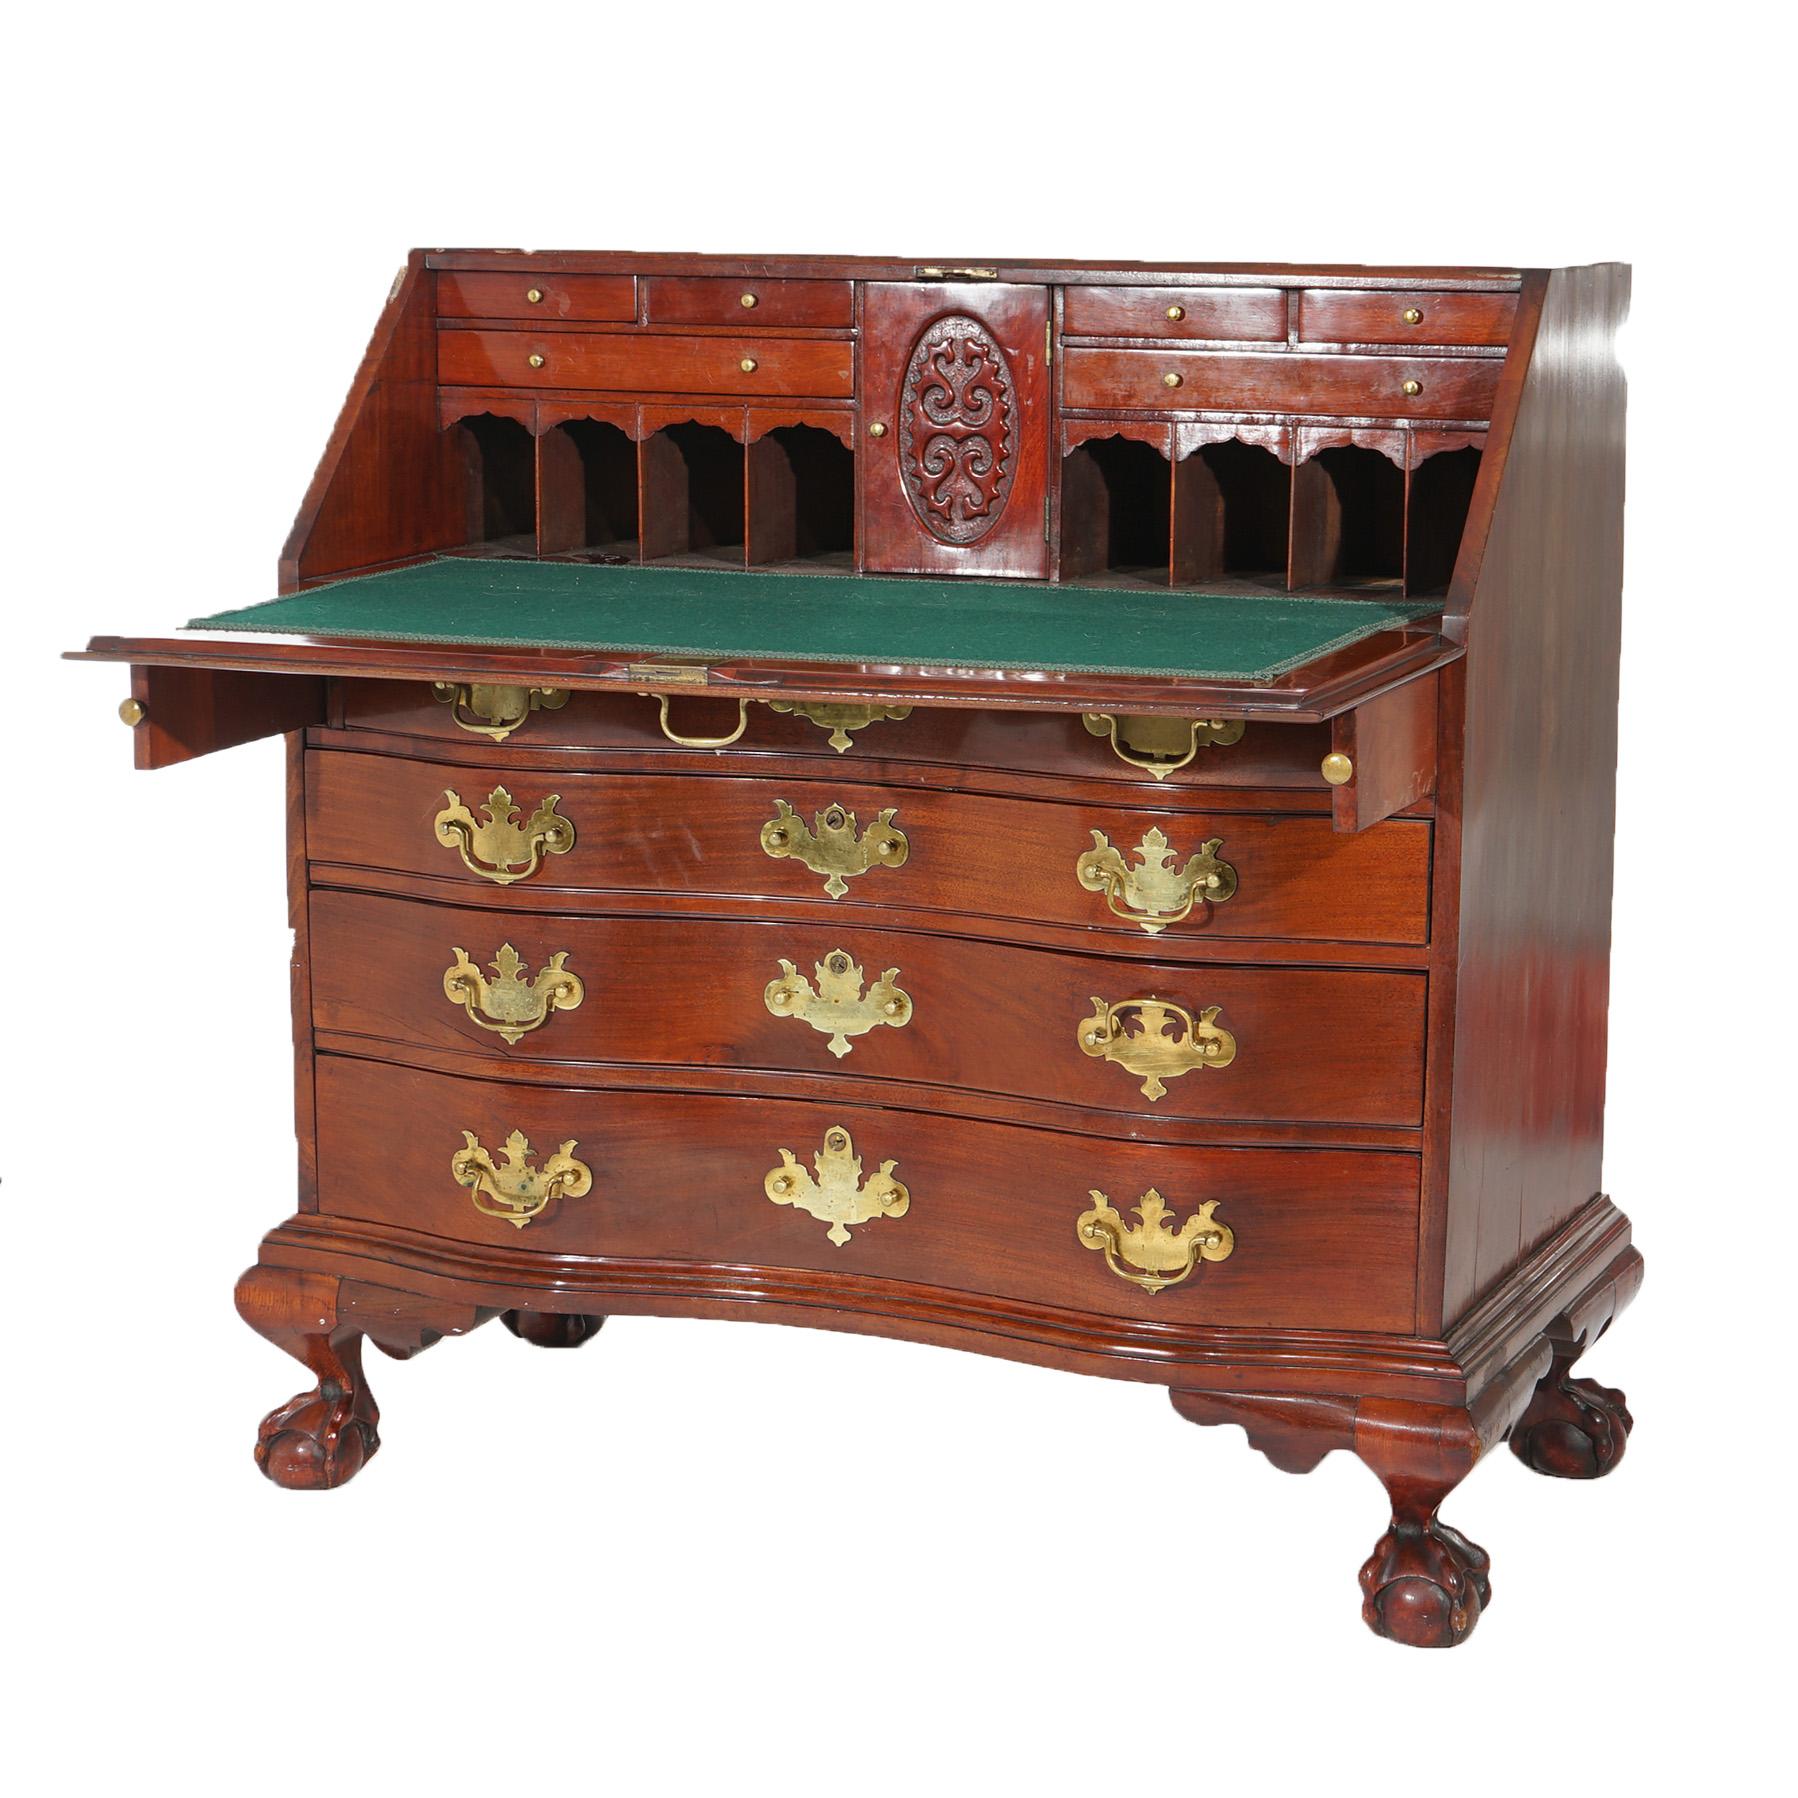 20th Century Chippendale Style Mahogany Serpentine Drop-Front Desk by Century, 20th C For Sale